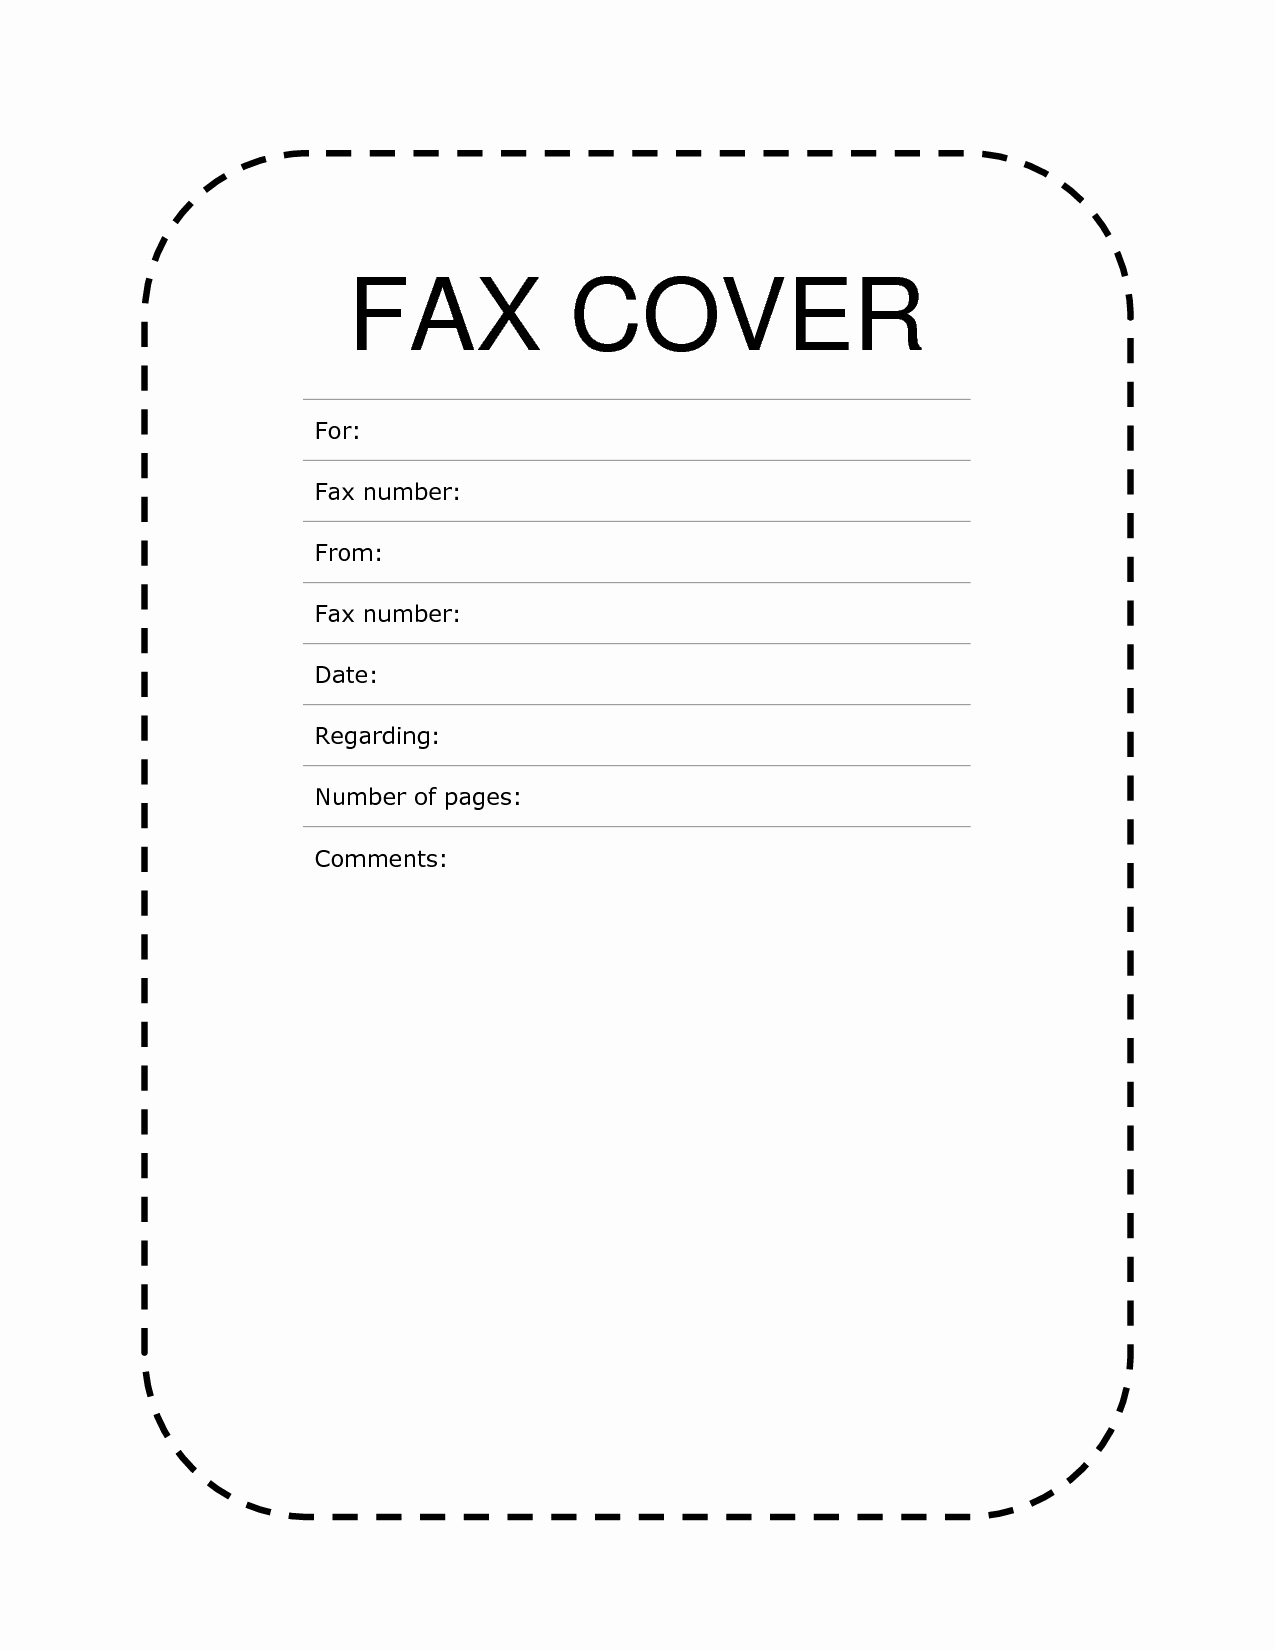 Fax Cover Sheet Template Word Awesome Free Fax Cover Sheet Template format Example Pdf Printable